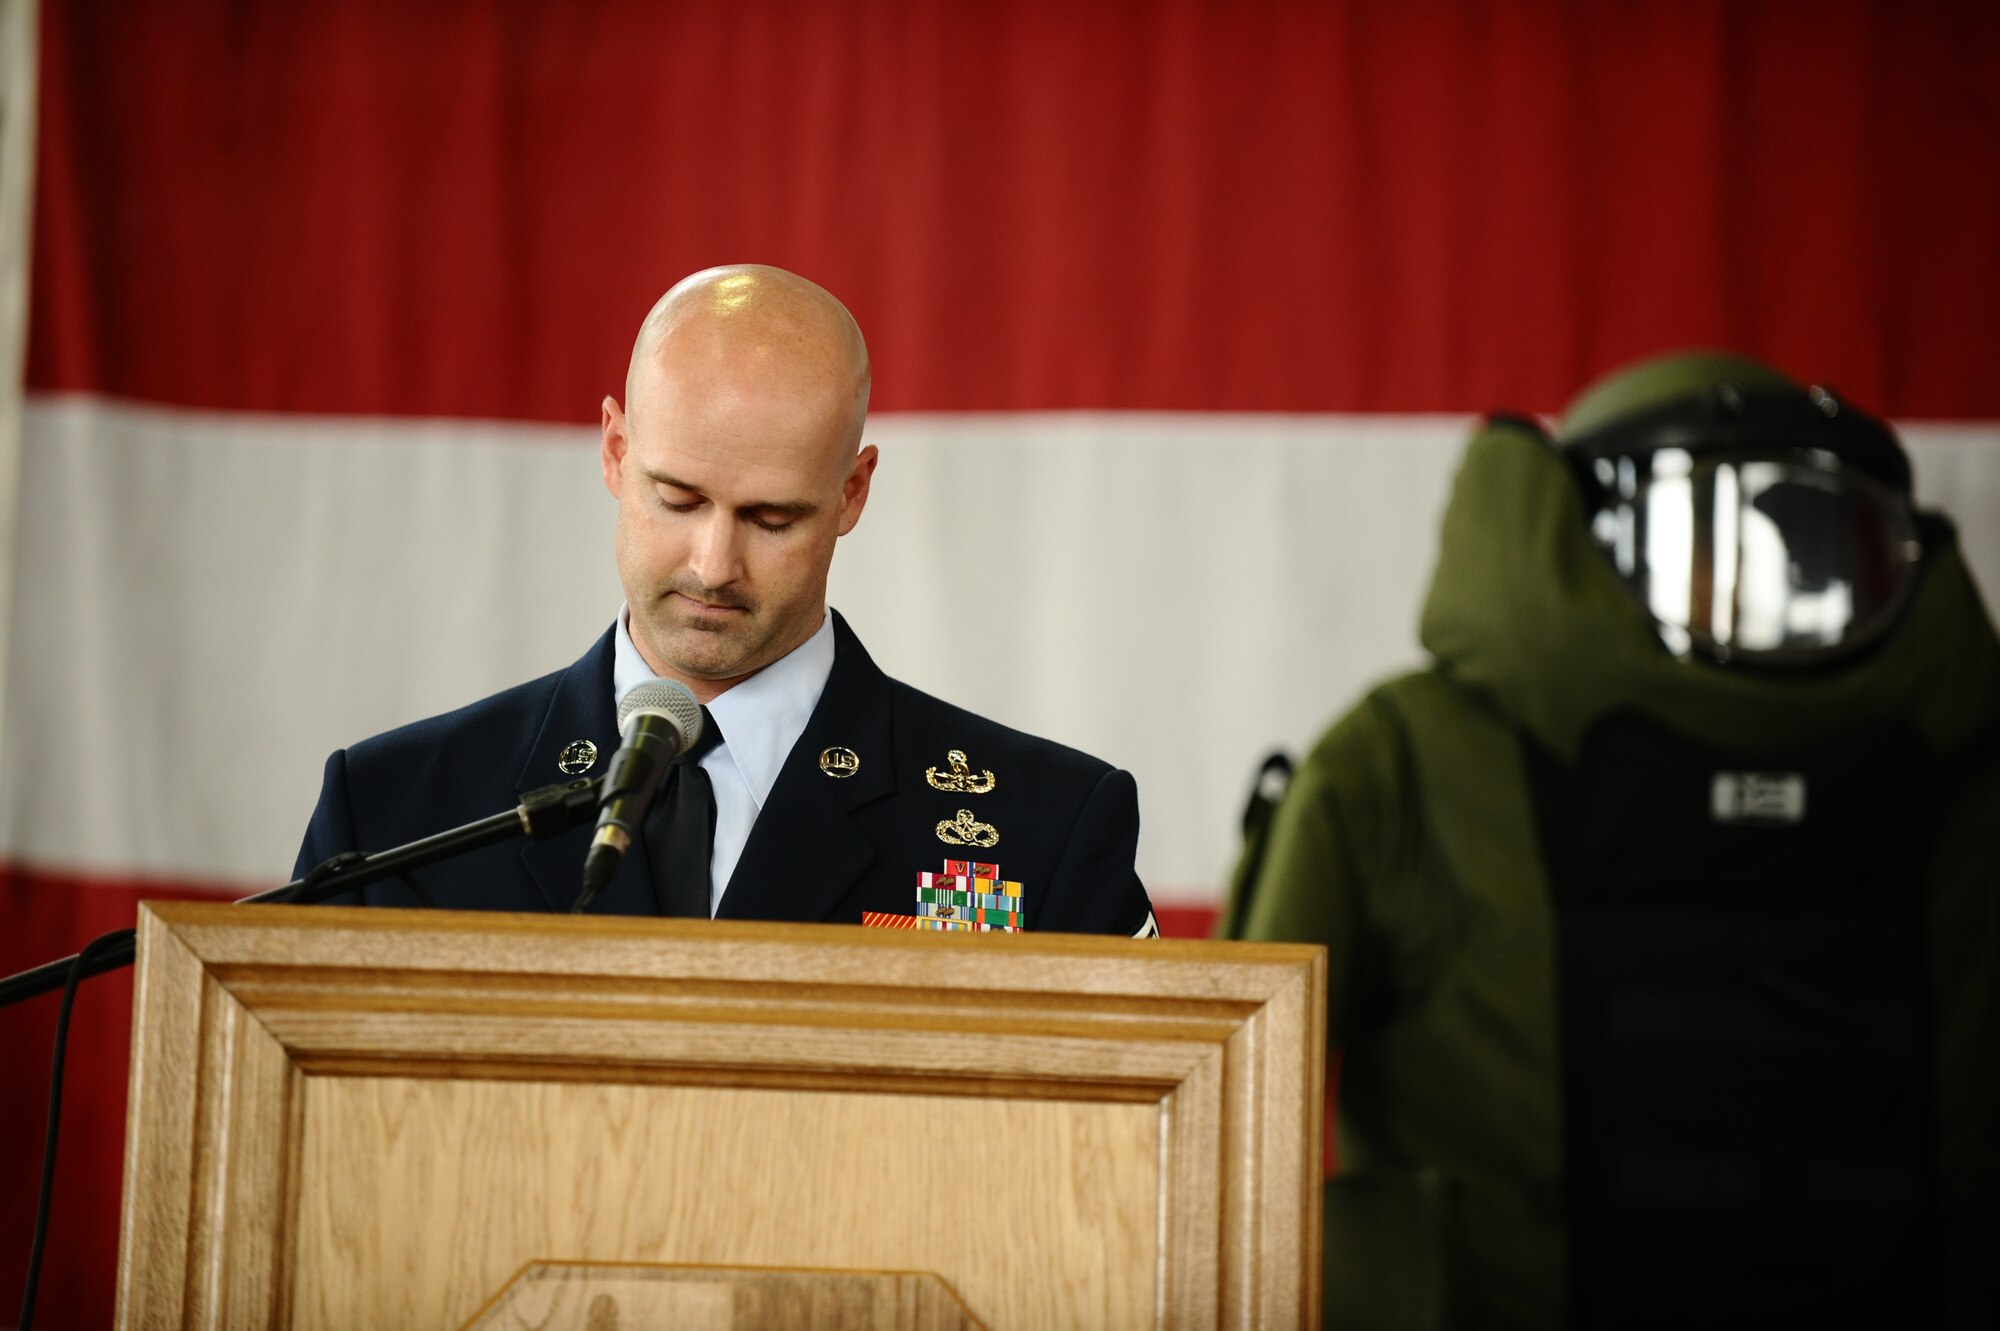 SPANGDAHLEM AIR BASE, Germany – Senior Master Sgt. Neil Jones, 52nd Civil Engineer Squadron Explosive Ordnance Disposal Flight, speaks during the memorial service for Staff Sgt. Joseph J. Hamski, 52nd CES EOD Flight, held here June 16. Sergeant Hamski was killed in action May 26, 2011, in Shorabak, Afghanistan, while responding to a known enemy weapons cache. (U.S. Air Force photo/Senior Airman Nathanael Callon)